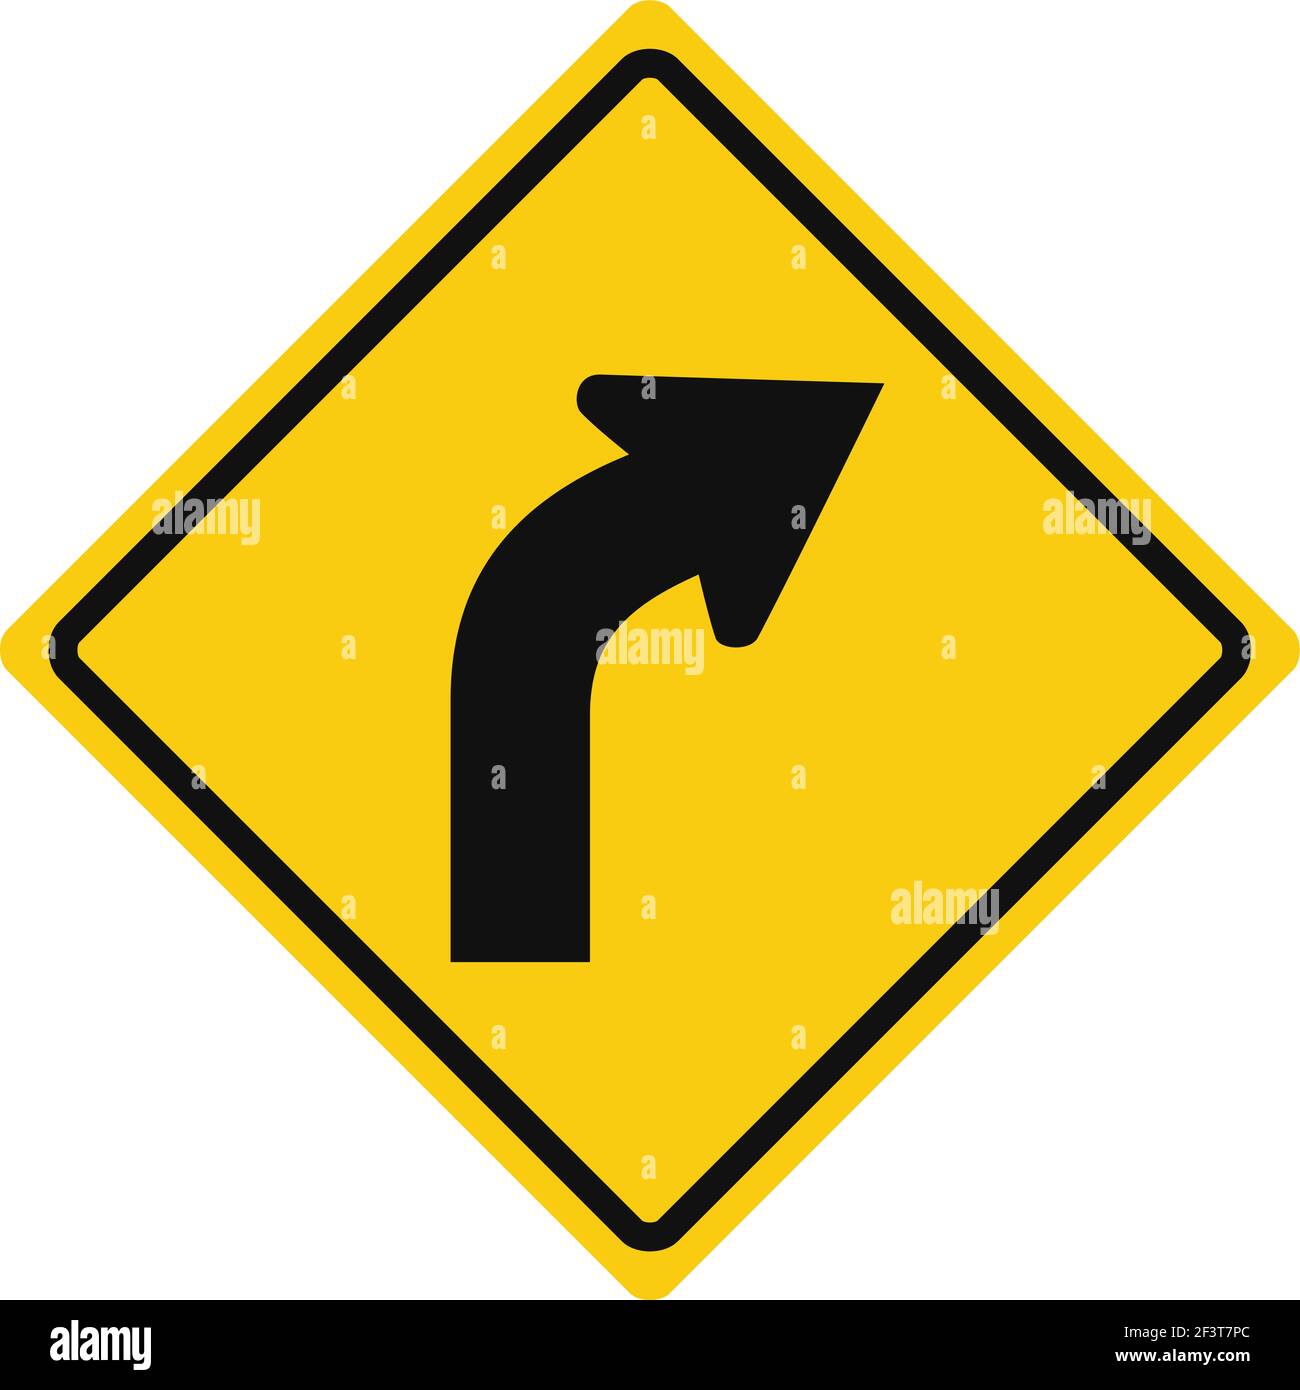 Rhomboid traffic signal in yellow and black, isolated on white background. Warning of sharp right curve Stock Vector